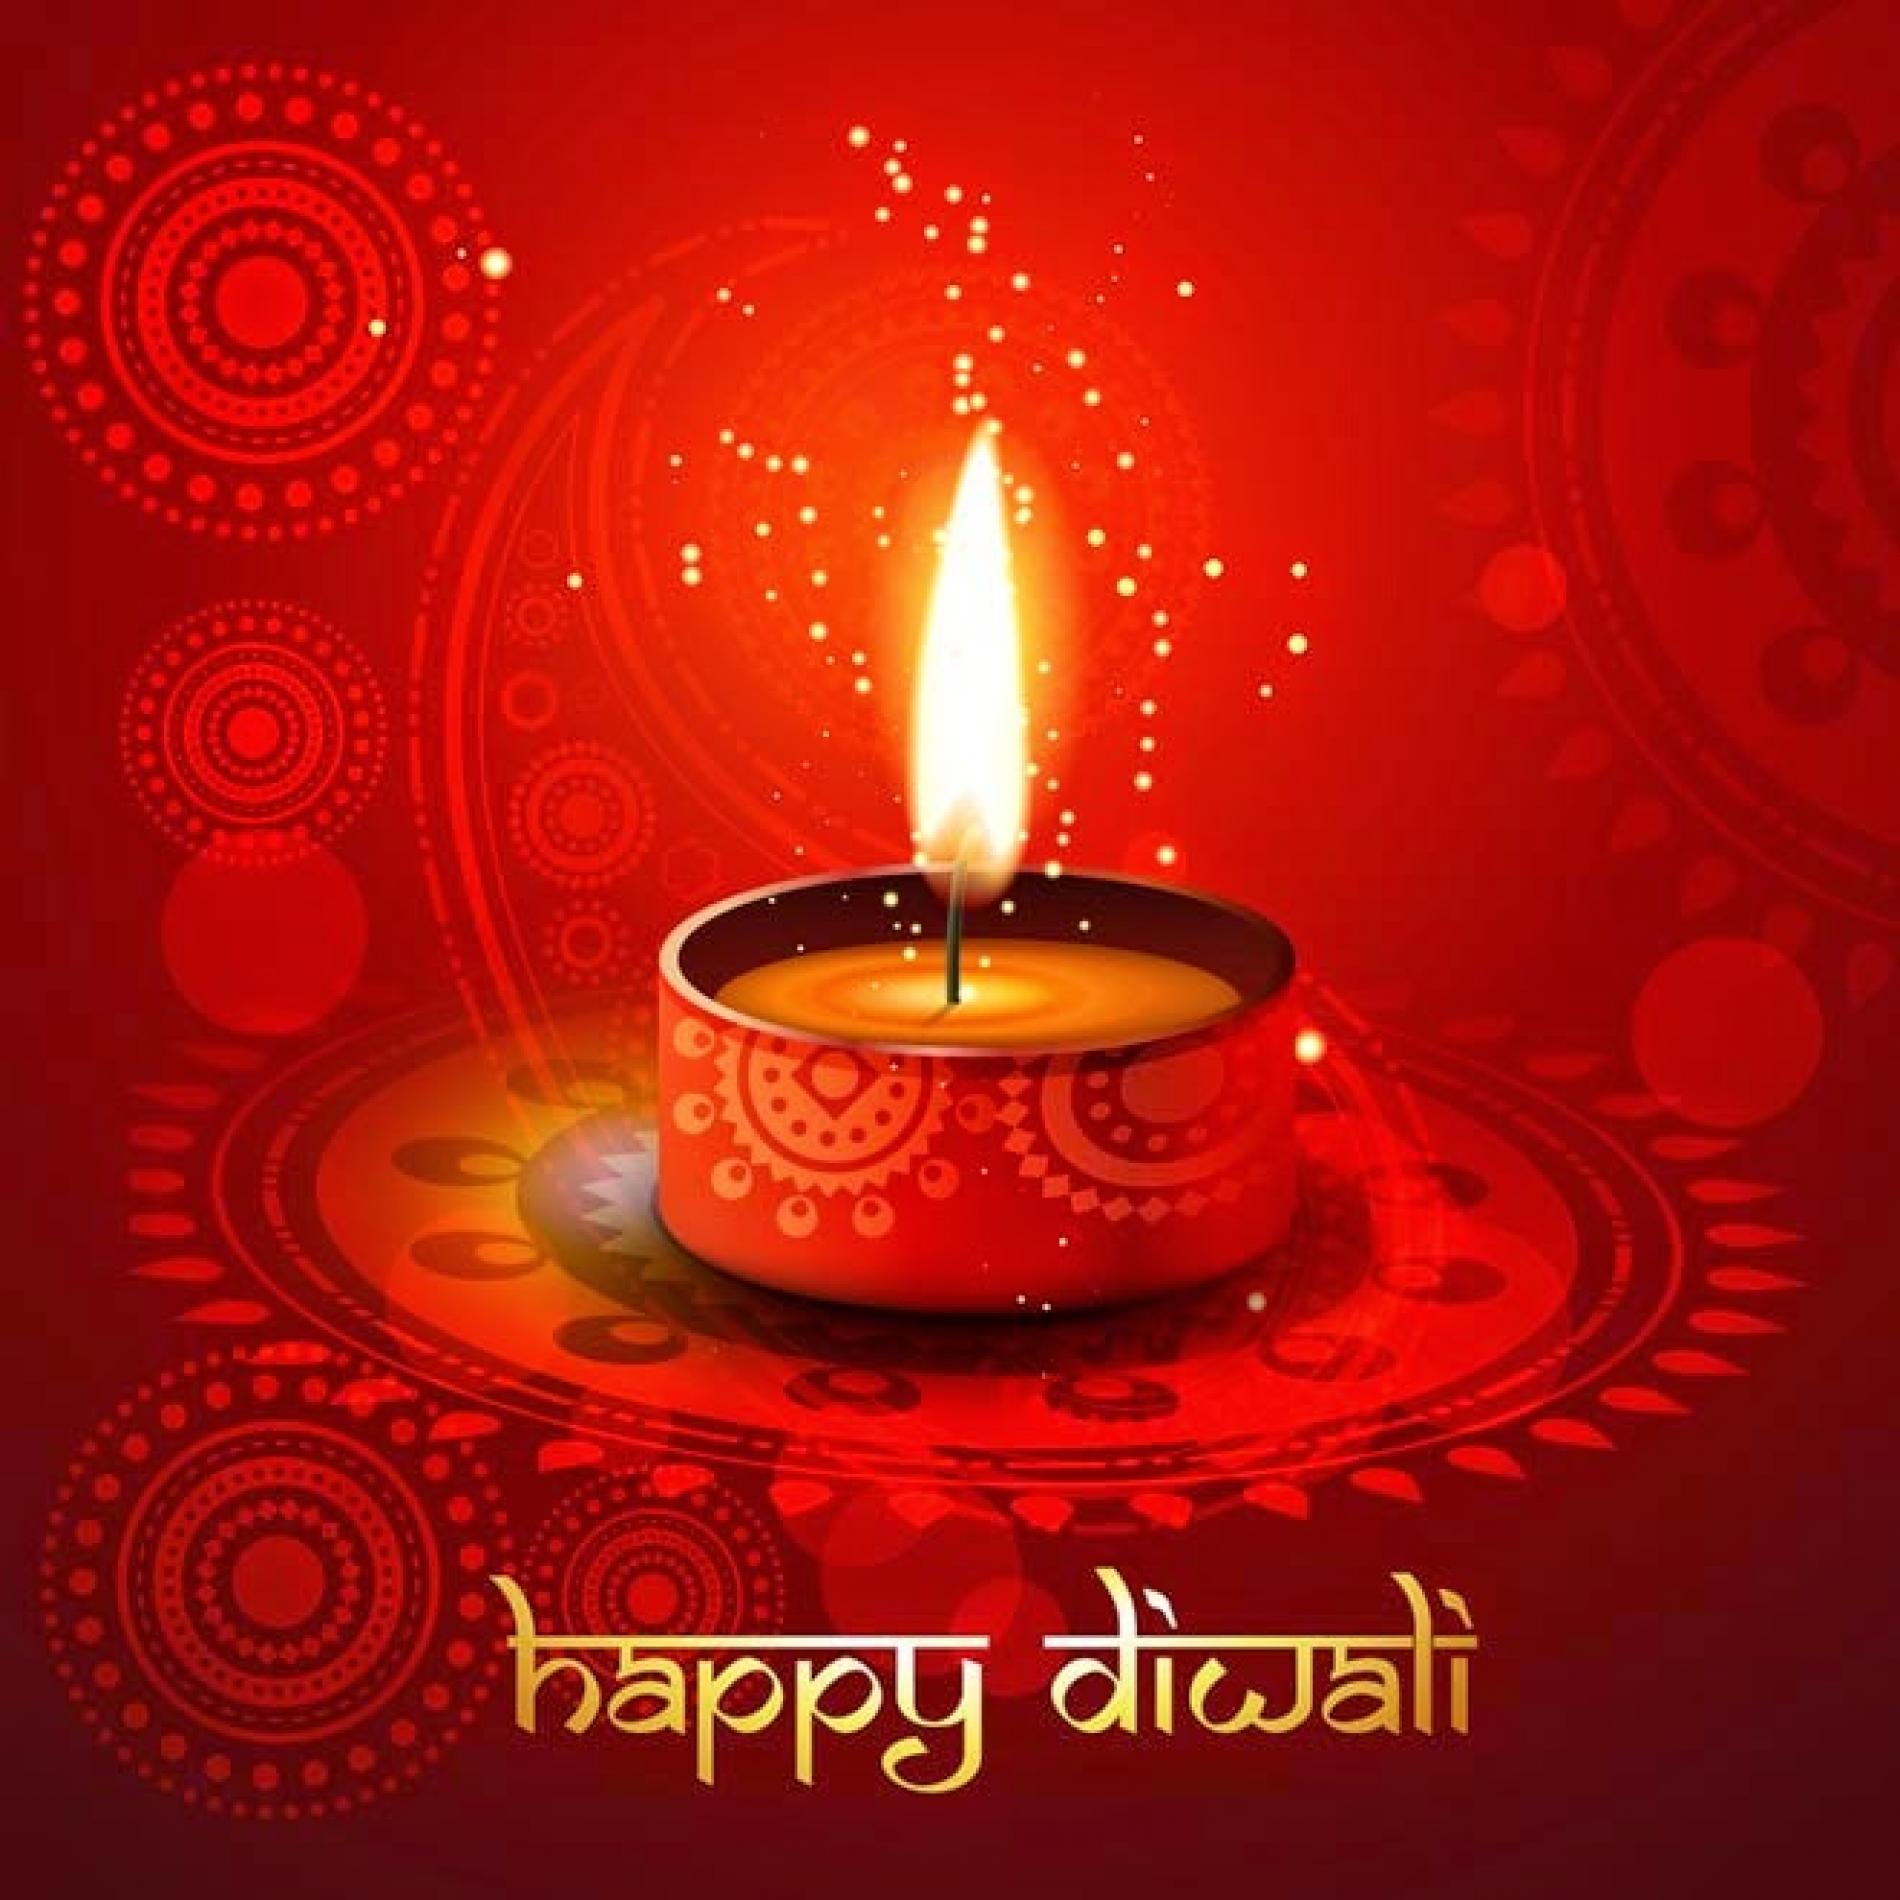 Happy Diwali To You & Yours